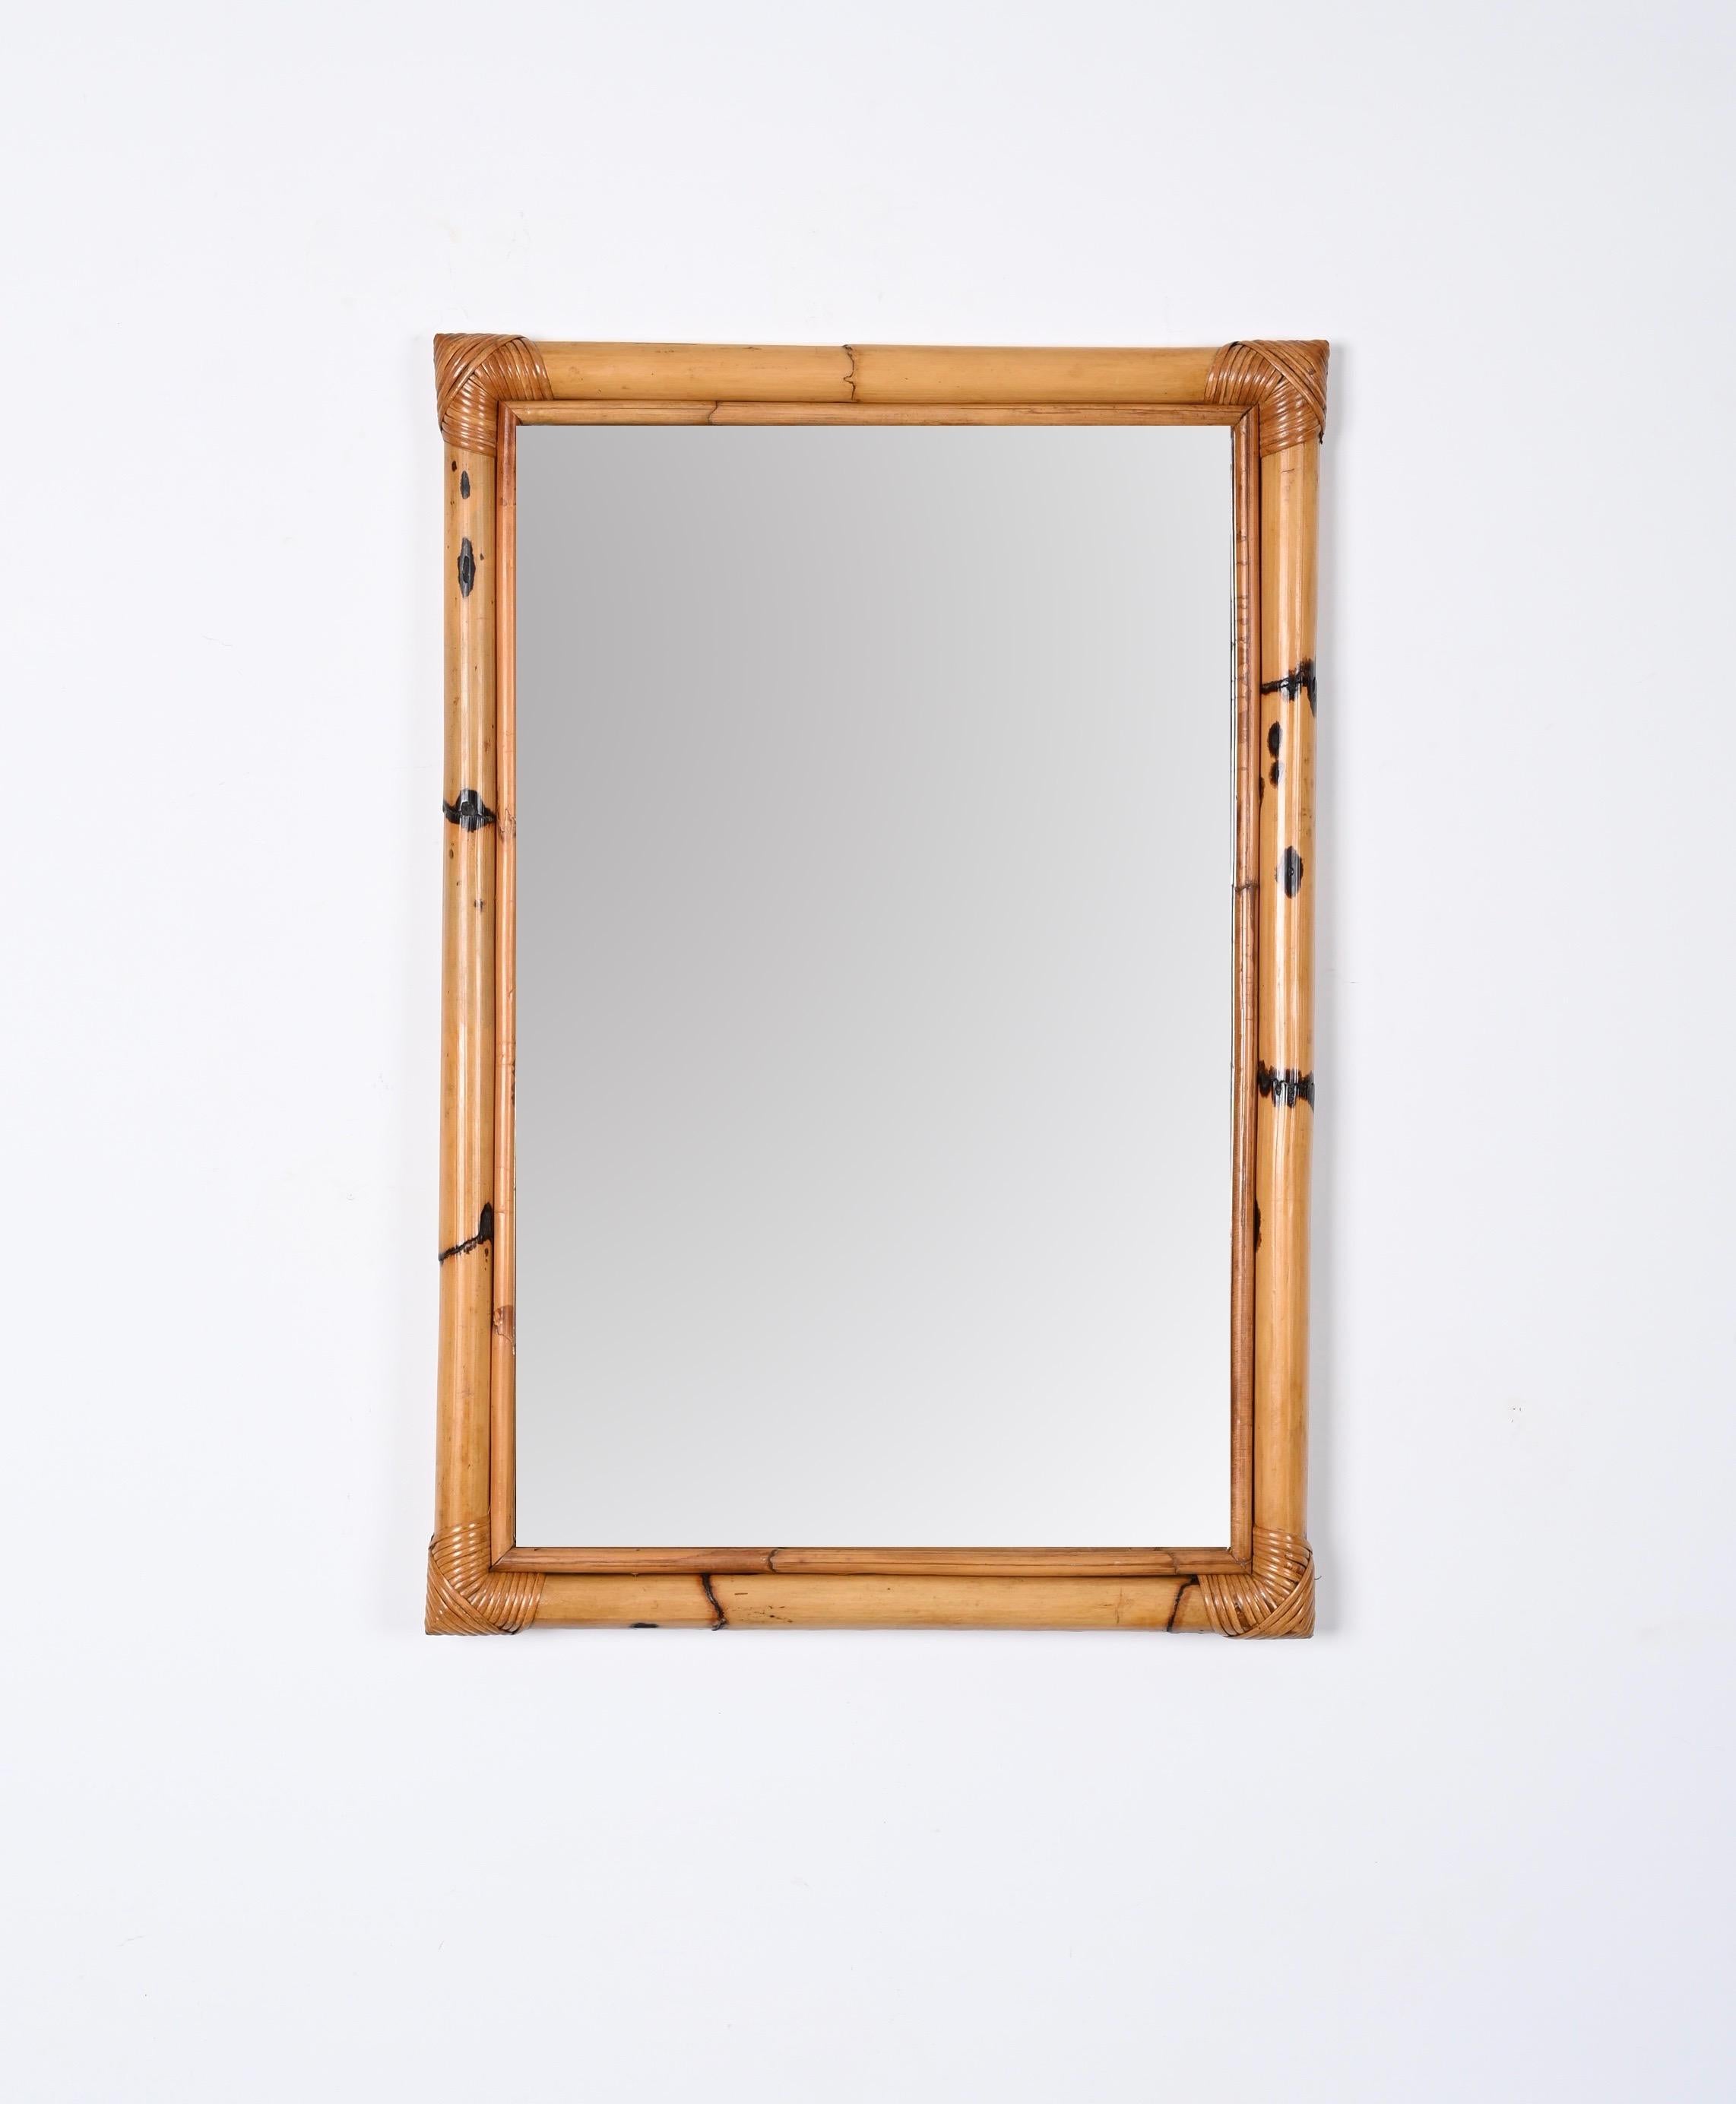 Midcentury Rectangular Mirror with Double Bamboo and Rattan Frame, Italy 1970s For Sale 2